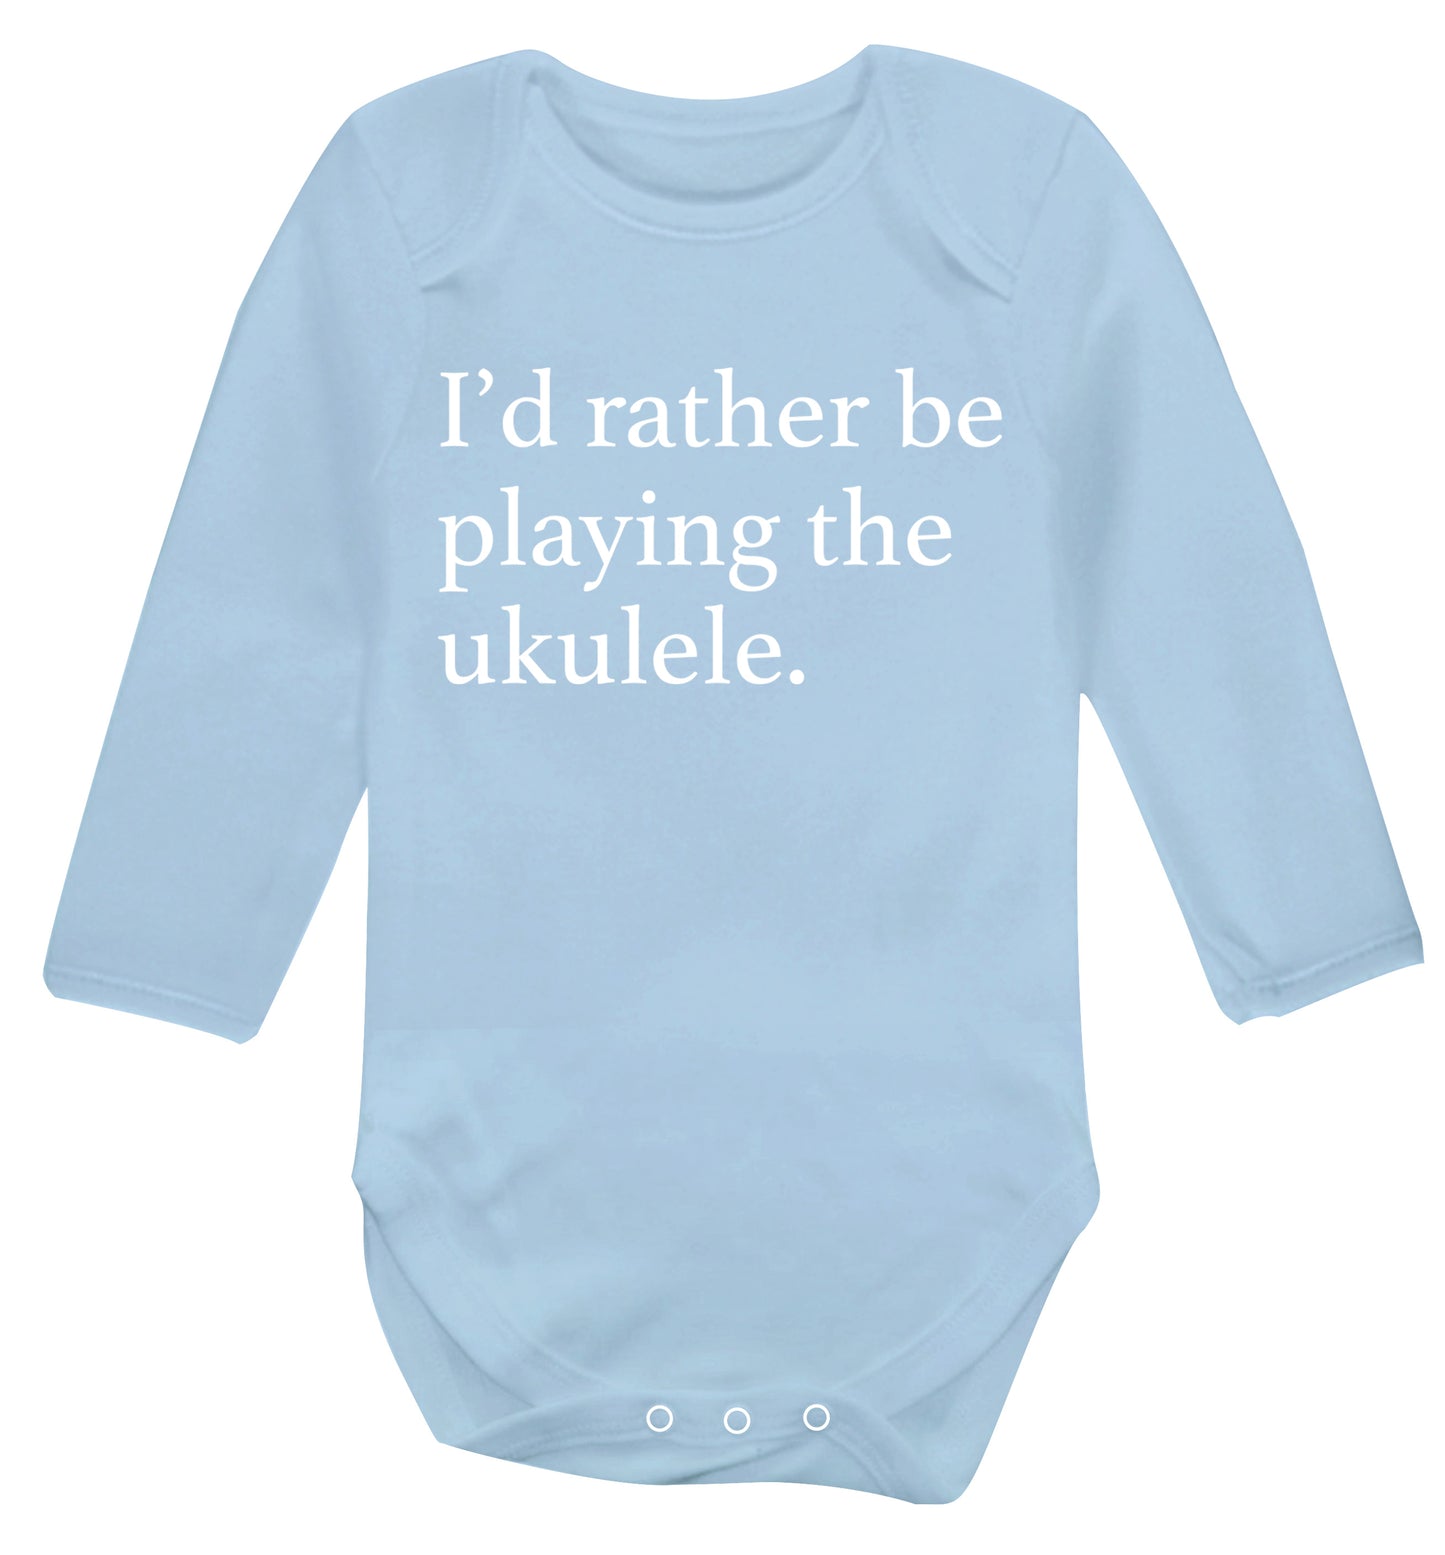 I'd rather by playing the ukulele Baby Vest long sleeved pale blue 6-12 months